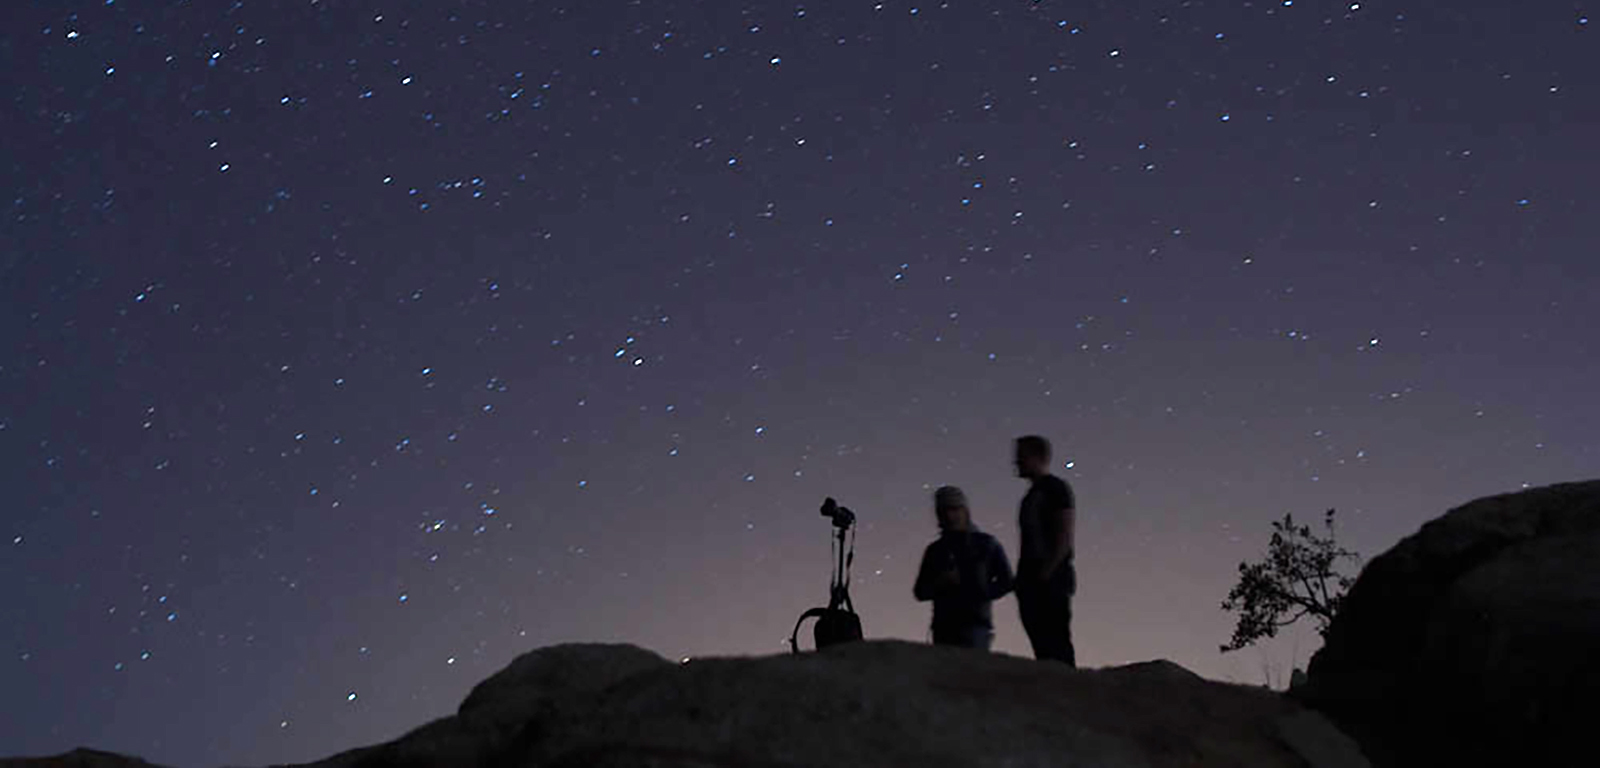 Two people stand with a telescope against the night sky.